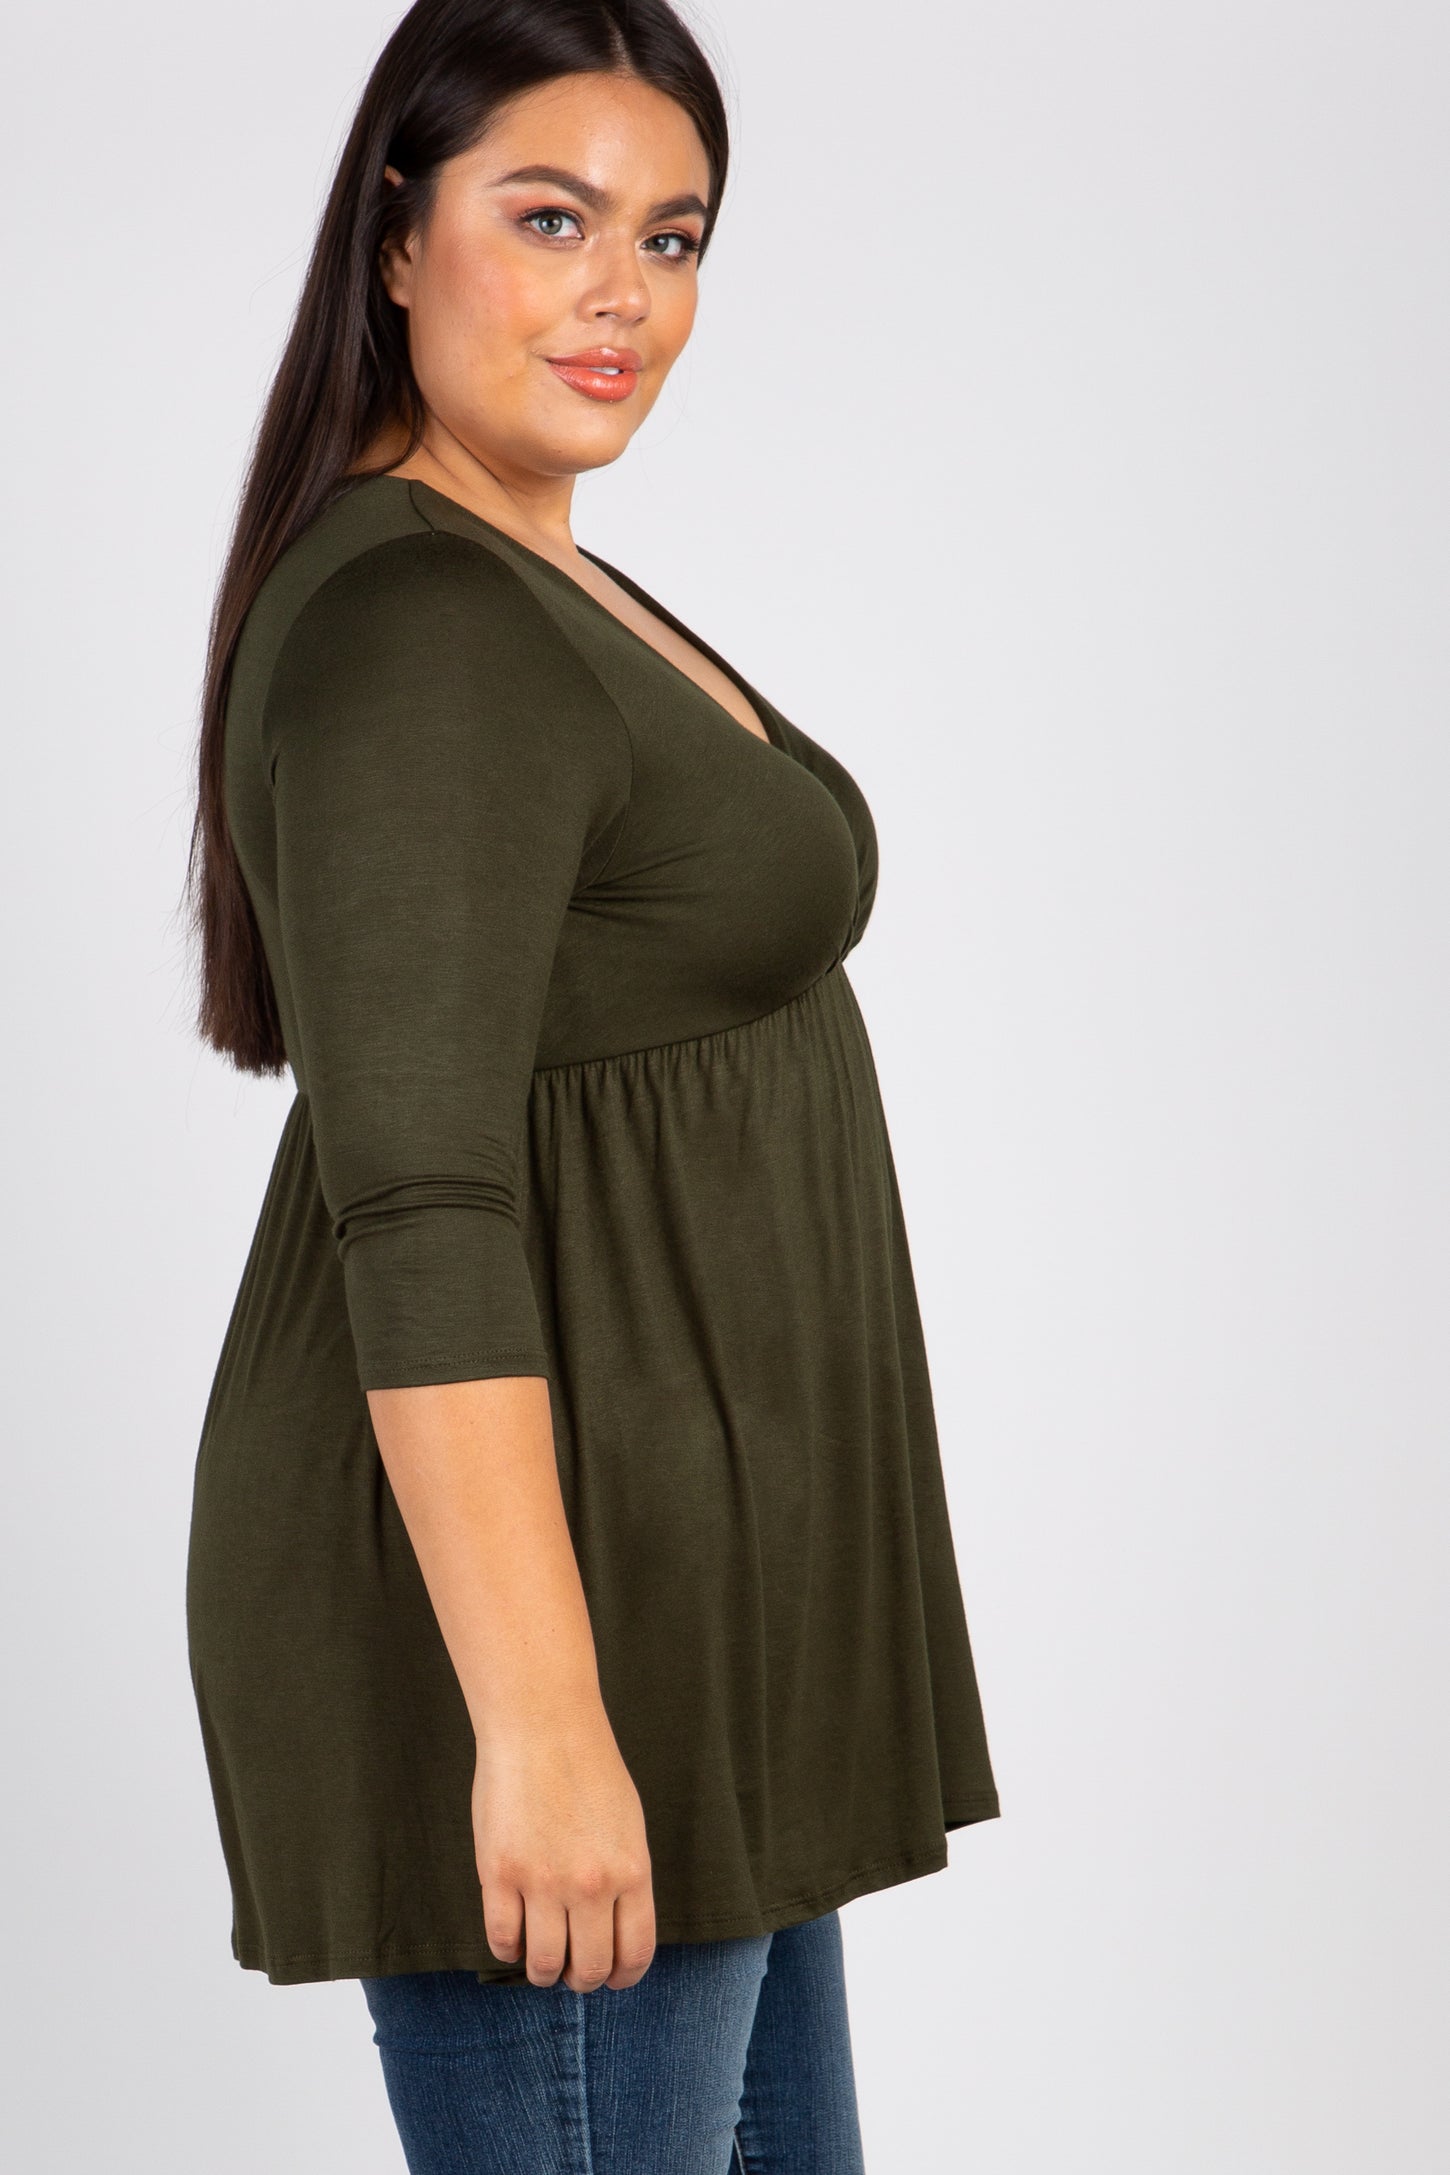 Olive Green Draped Front 3/4 Sleeve Nursing Plus Top